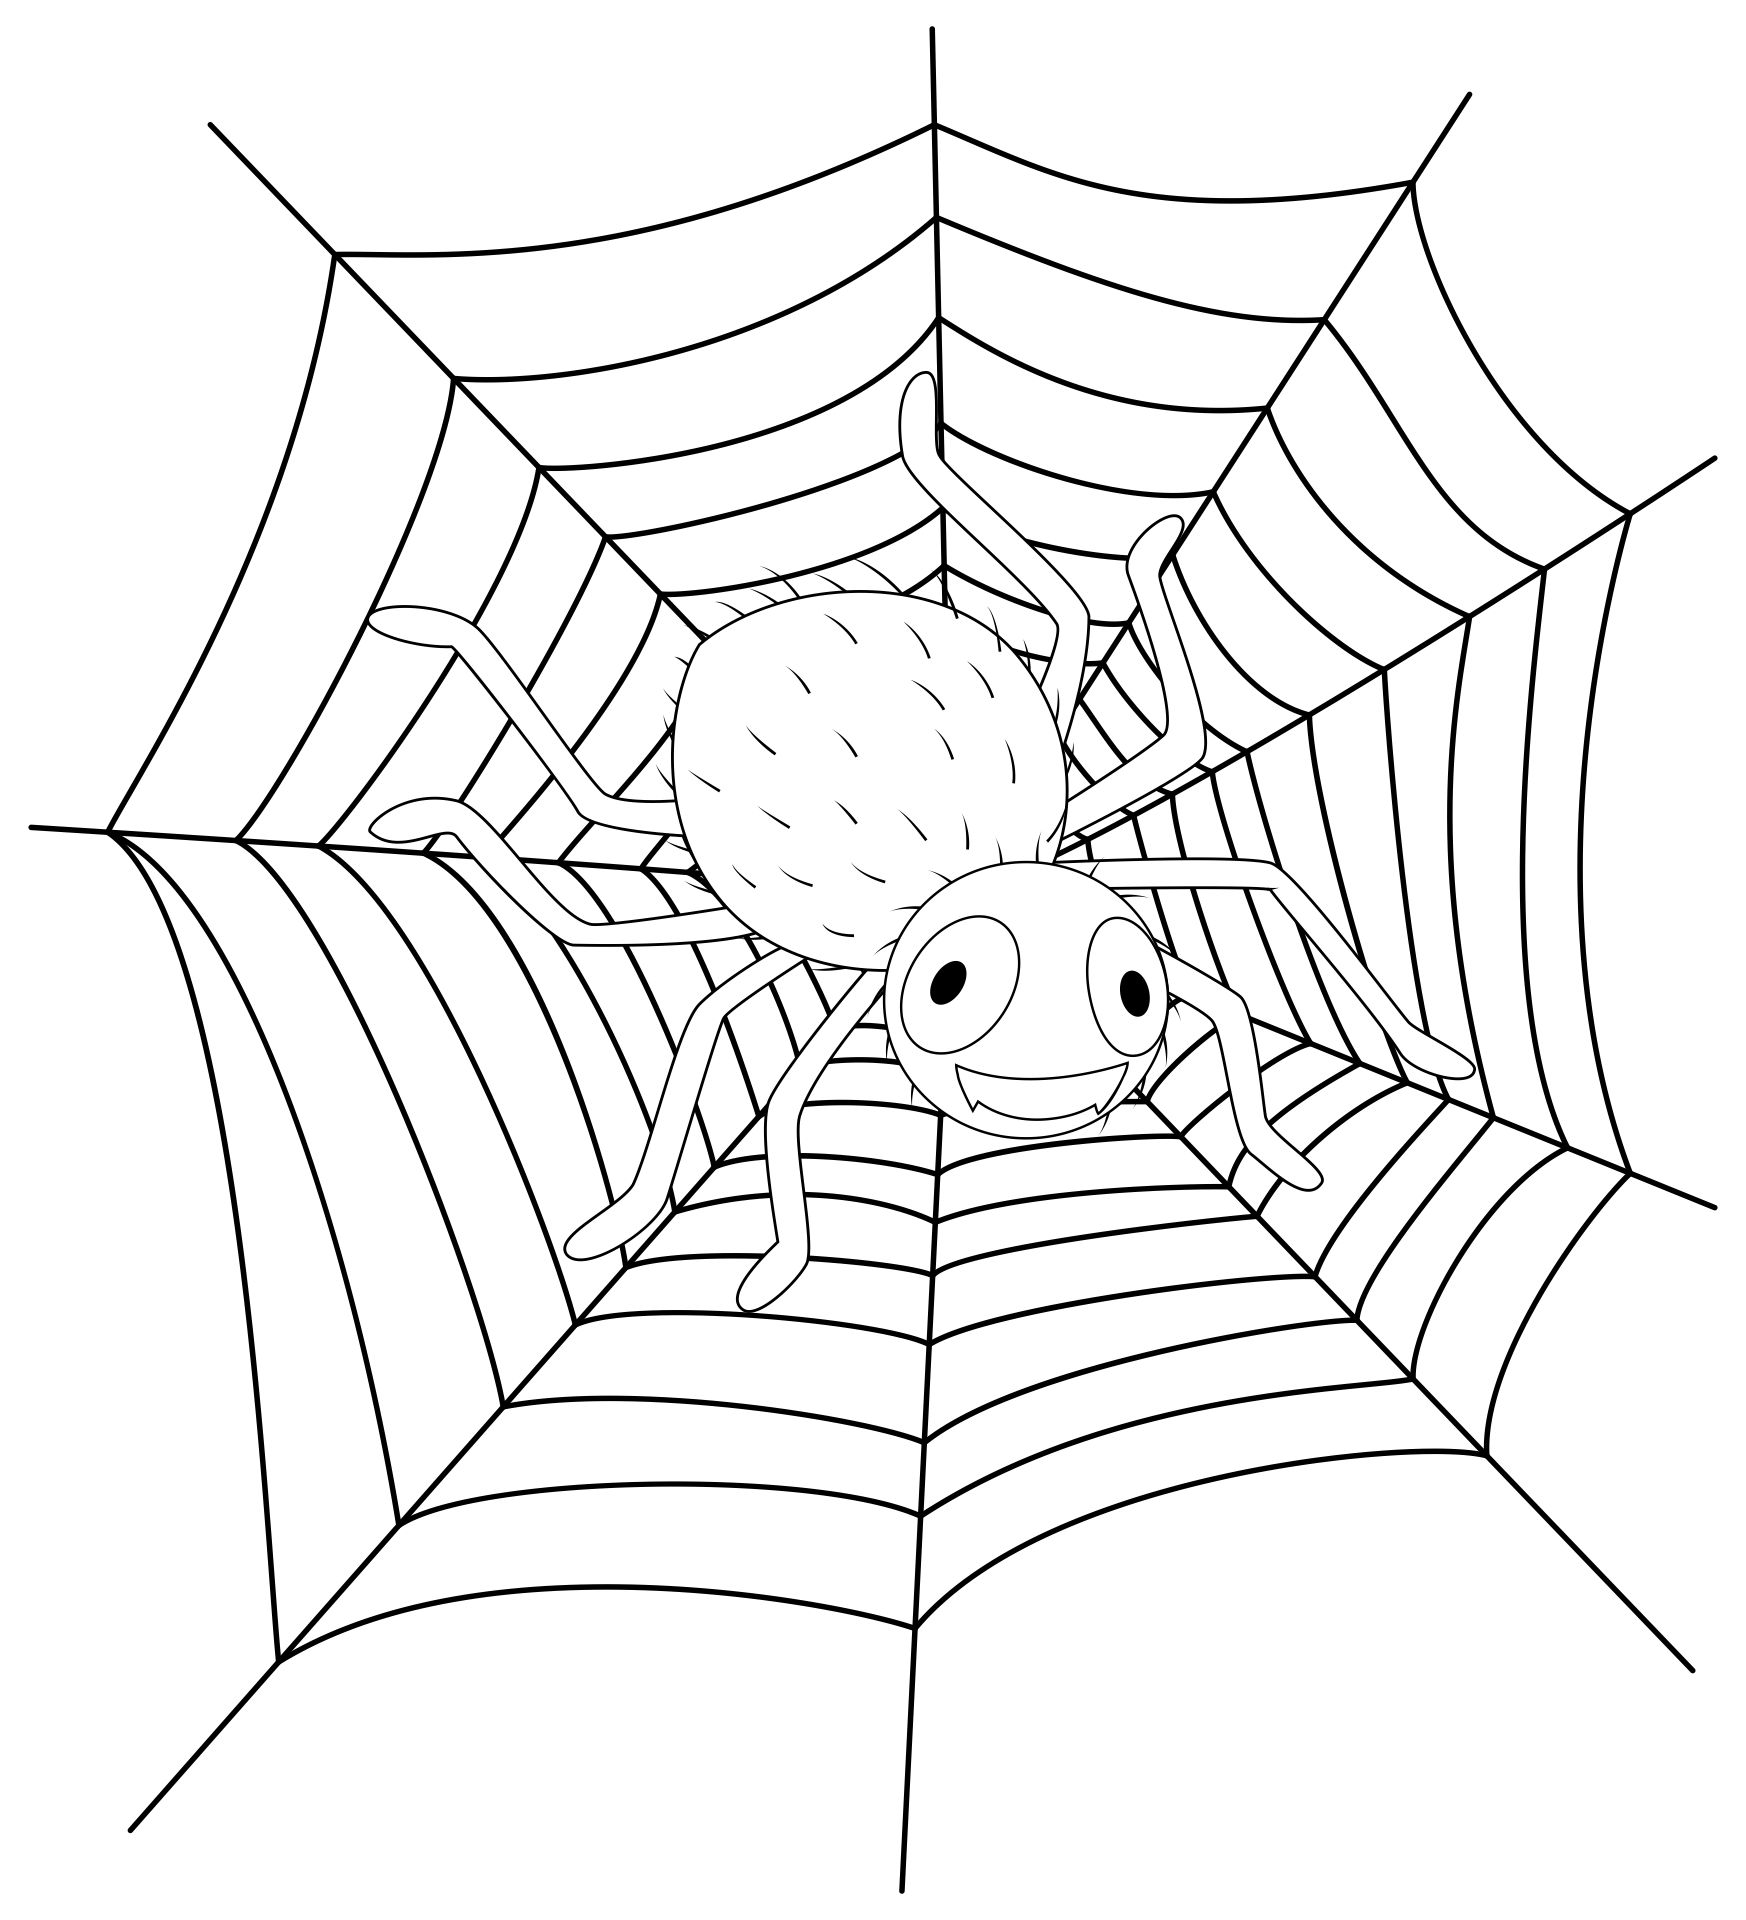 Printable Halloween Coloring Page Of A Spider